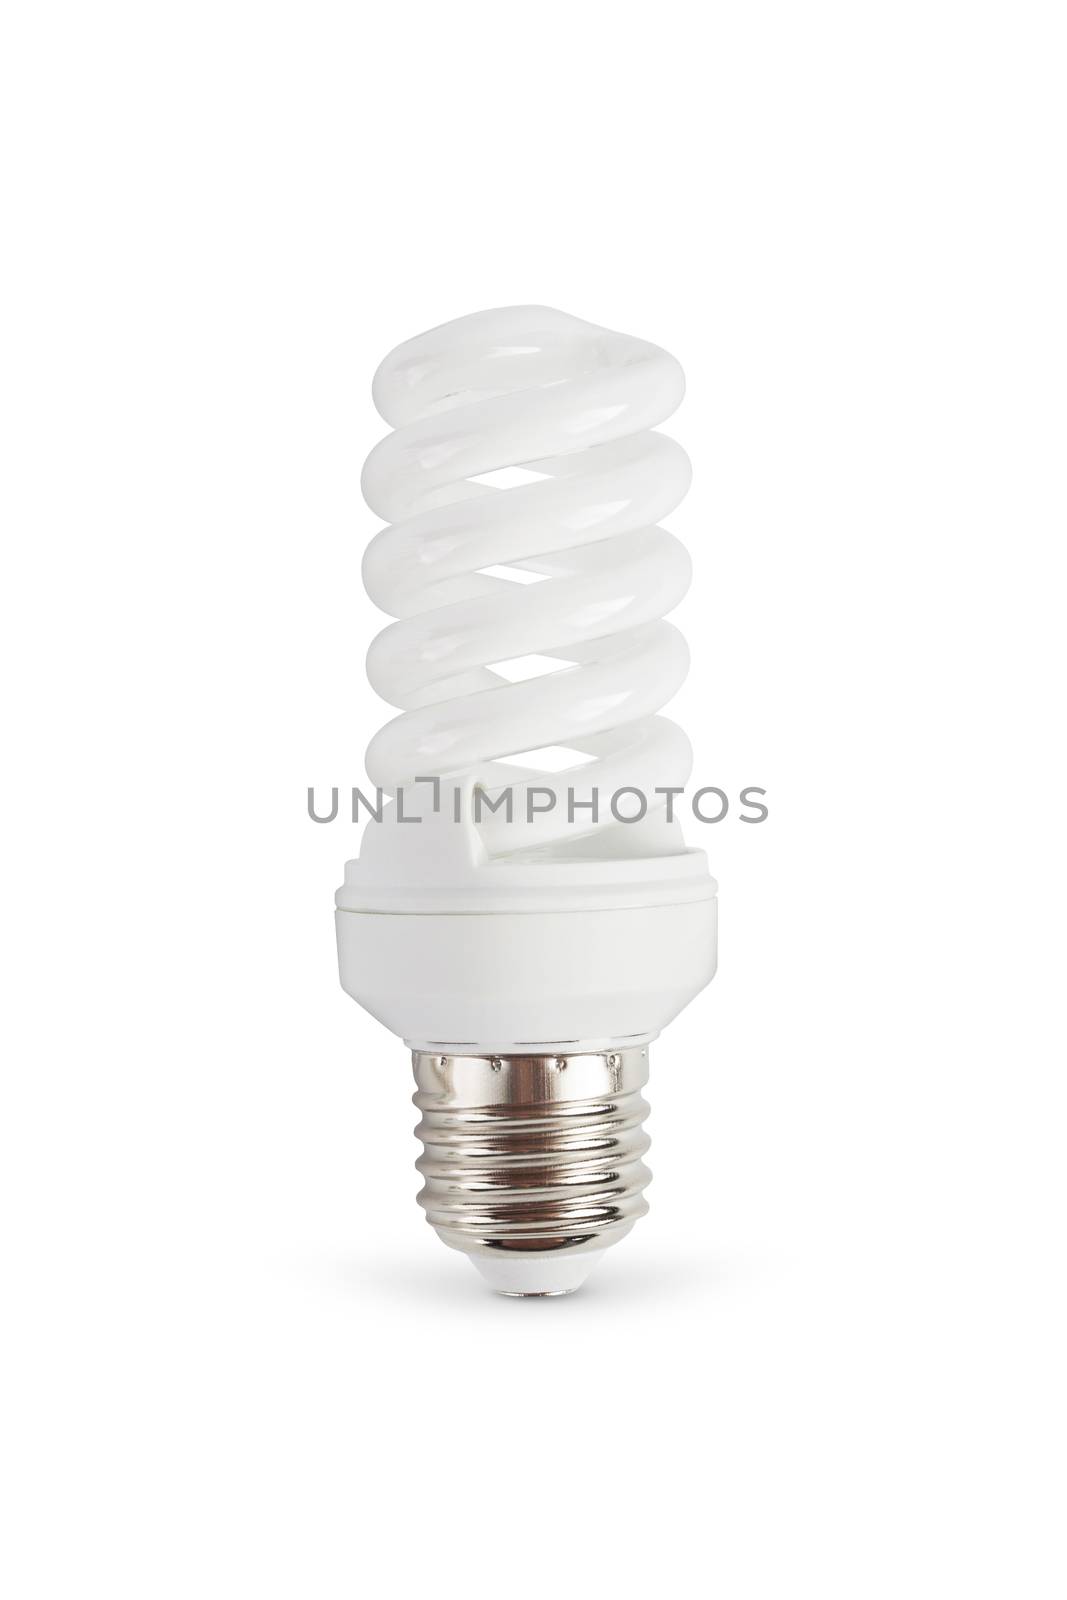 Energy saving light bulb on a white background isolated. With clipping path